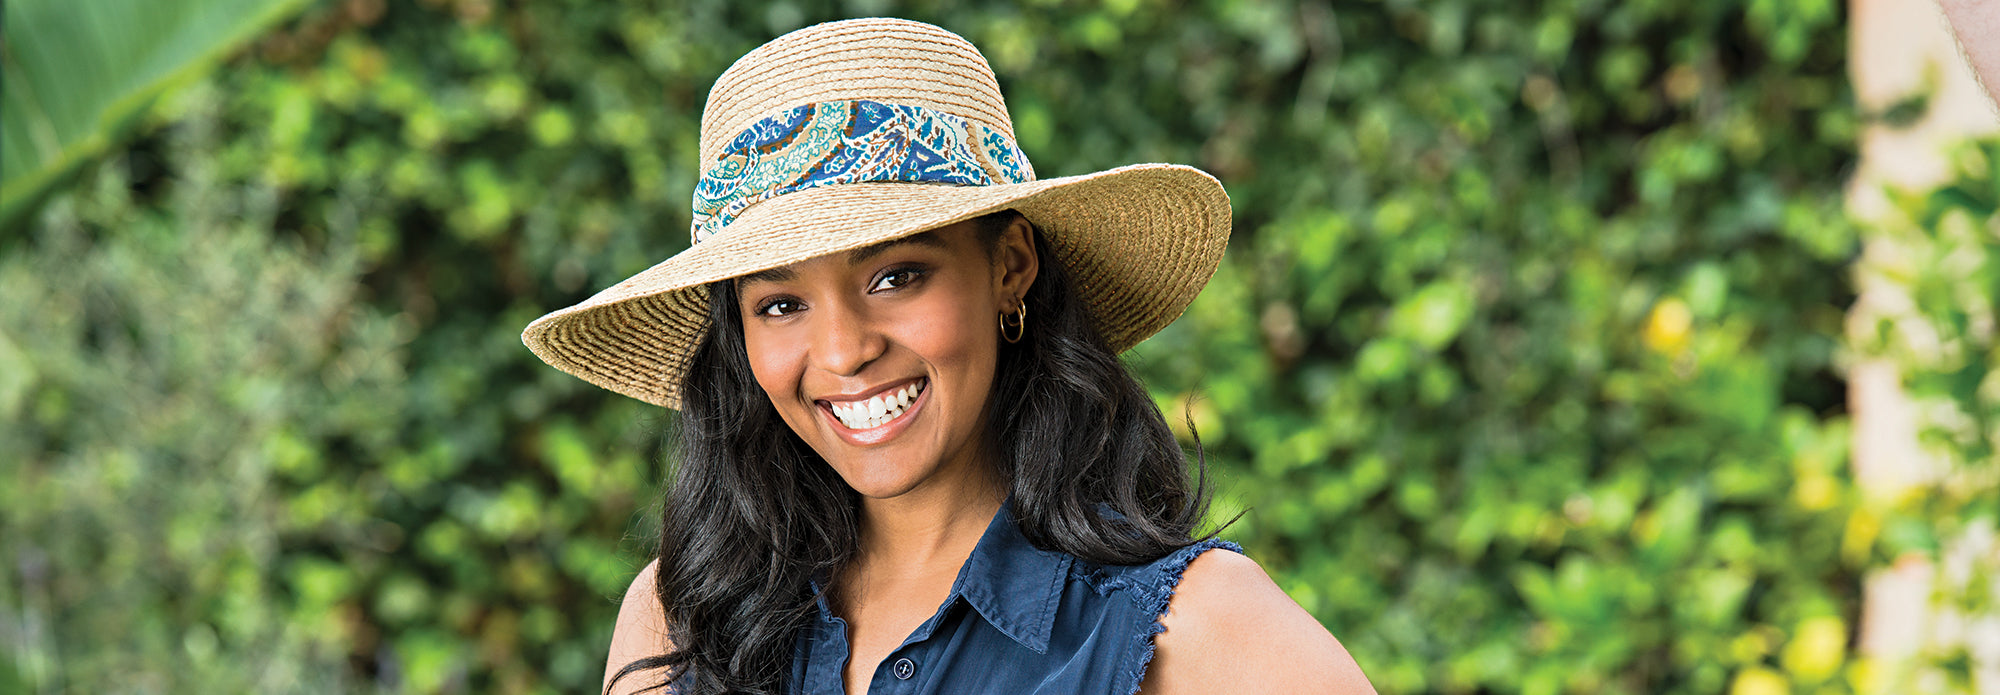 Wallaroo Hats on Sale | Men's and Women's Hats on Sale – Tagged 